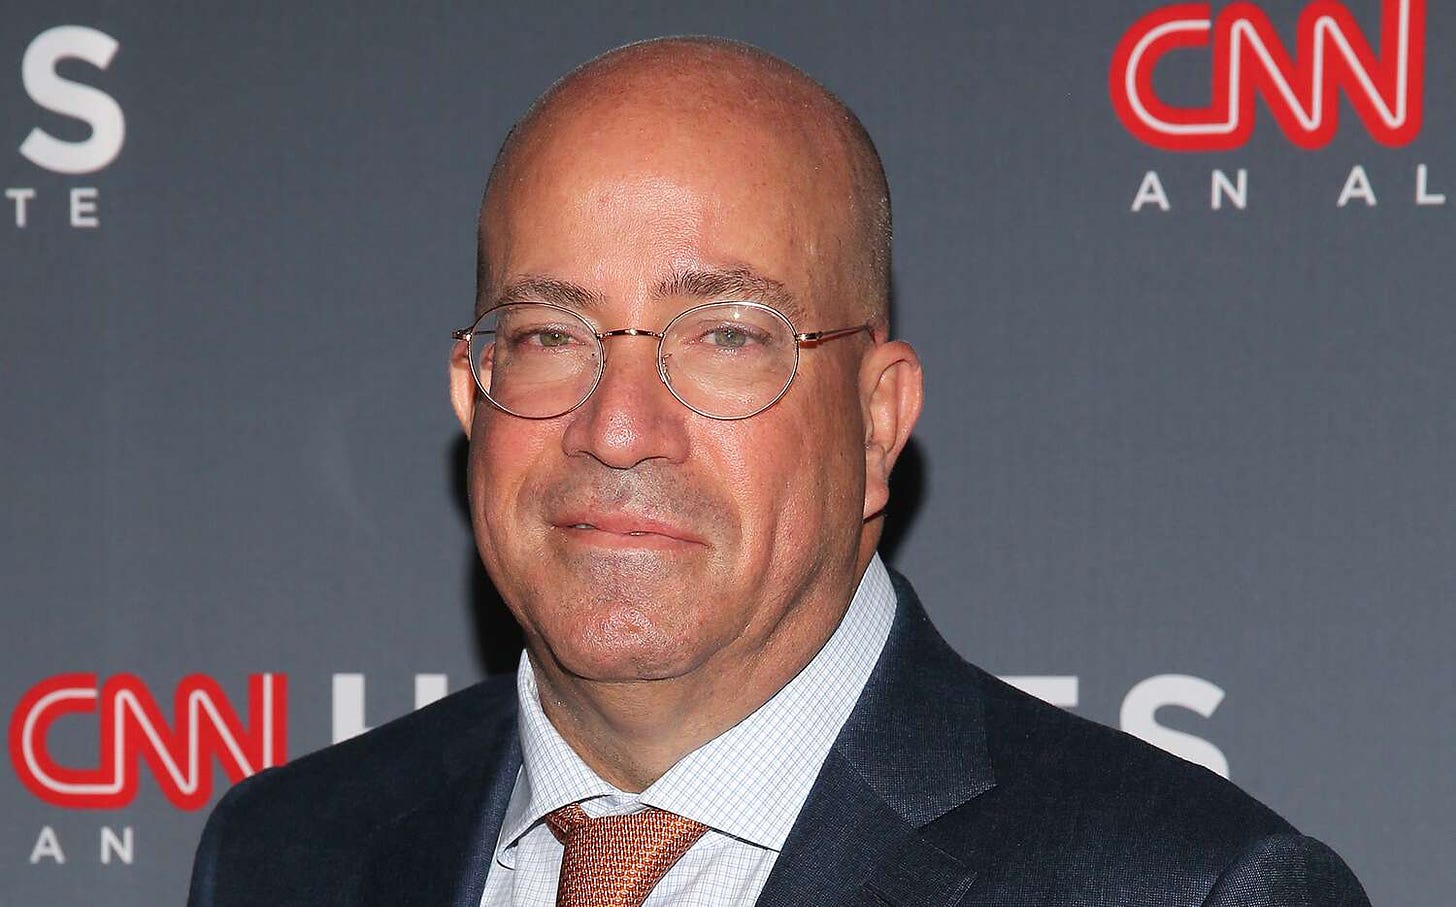 CNN President Jeff Zucker Resigns After Relationship with Colleague |  PEOPLE.com